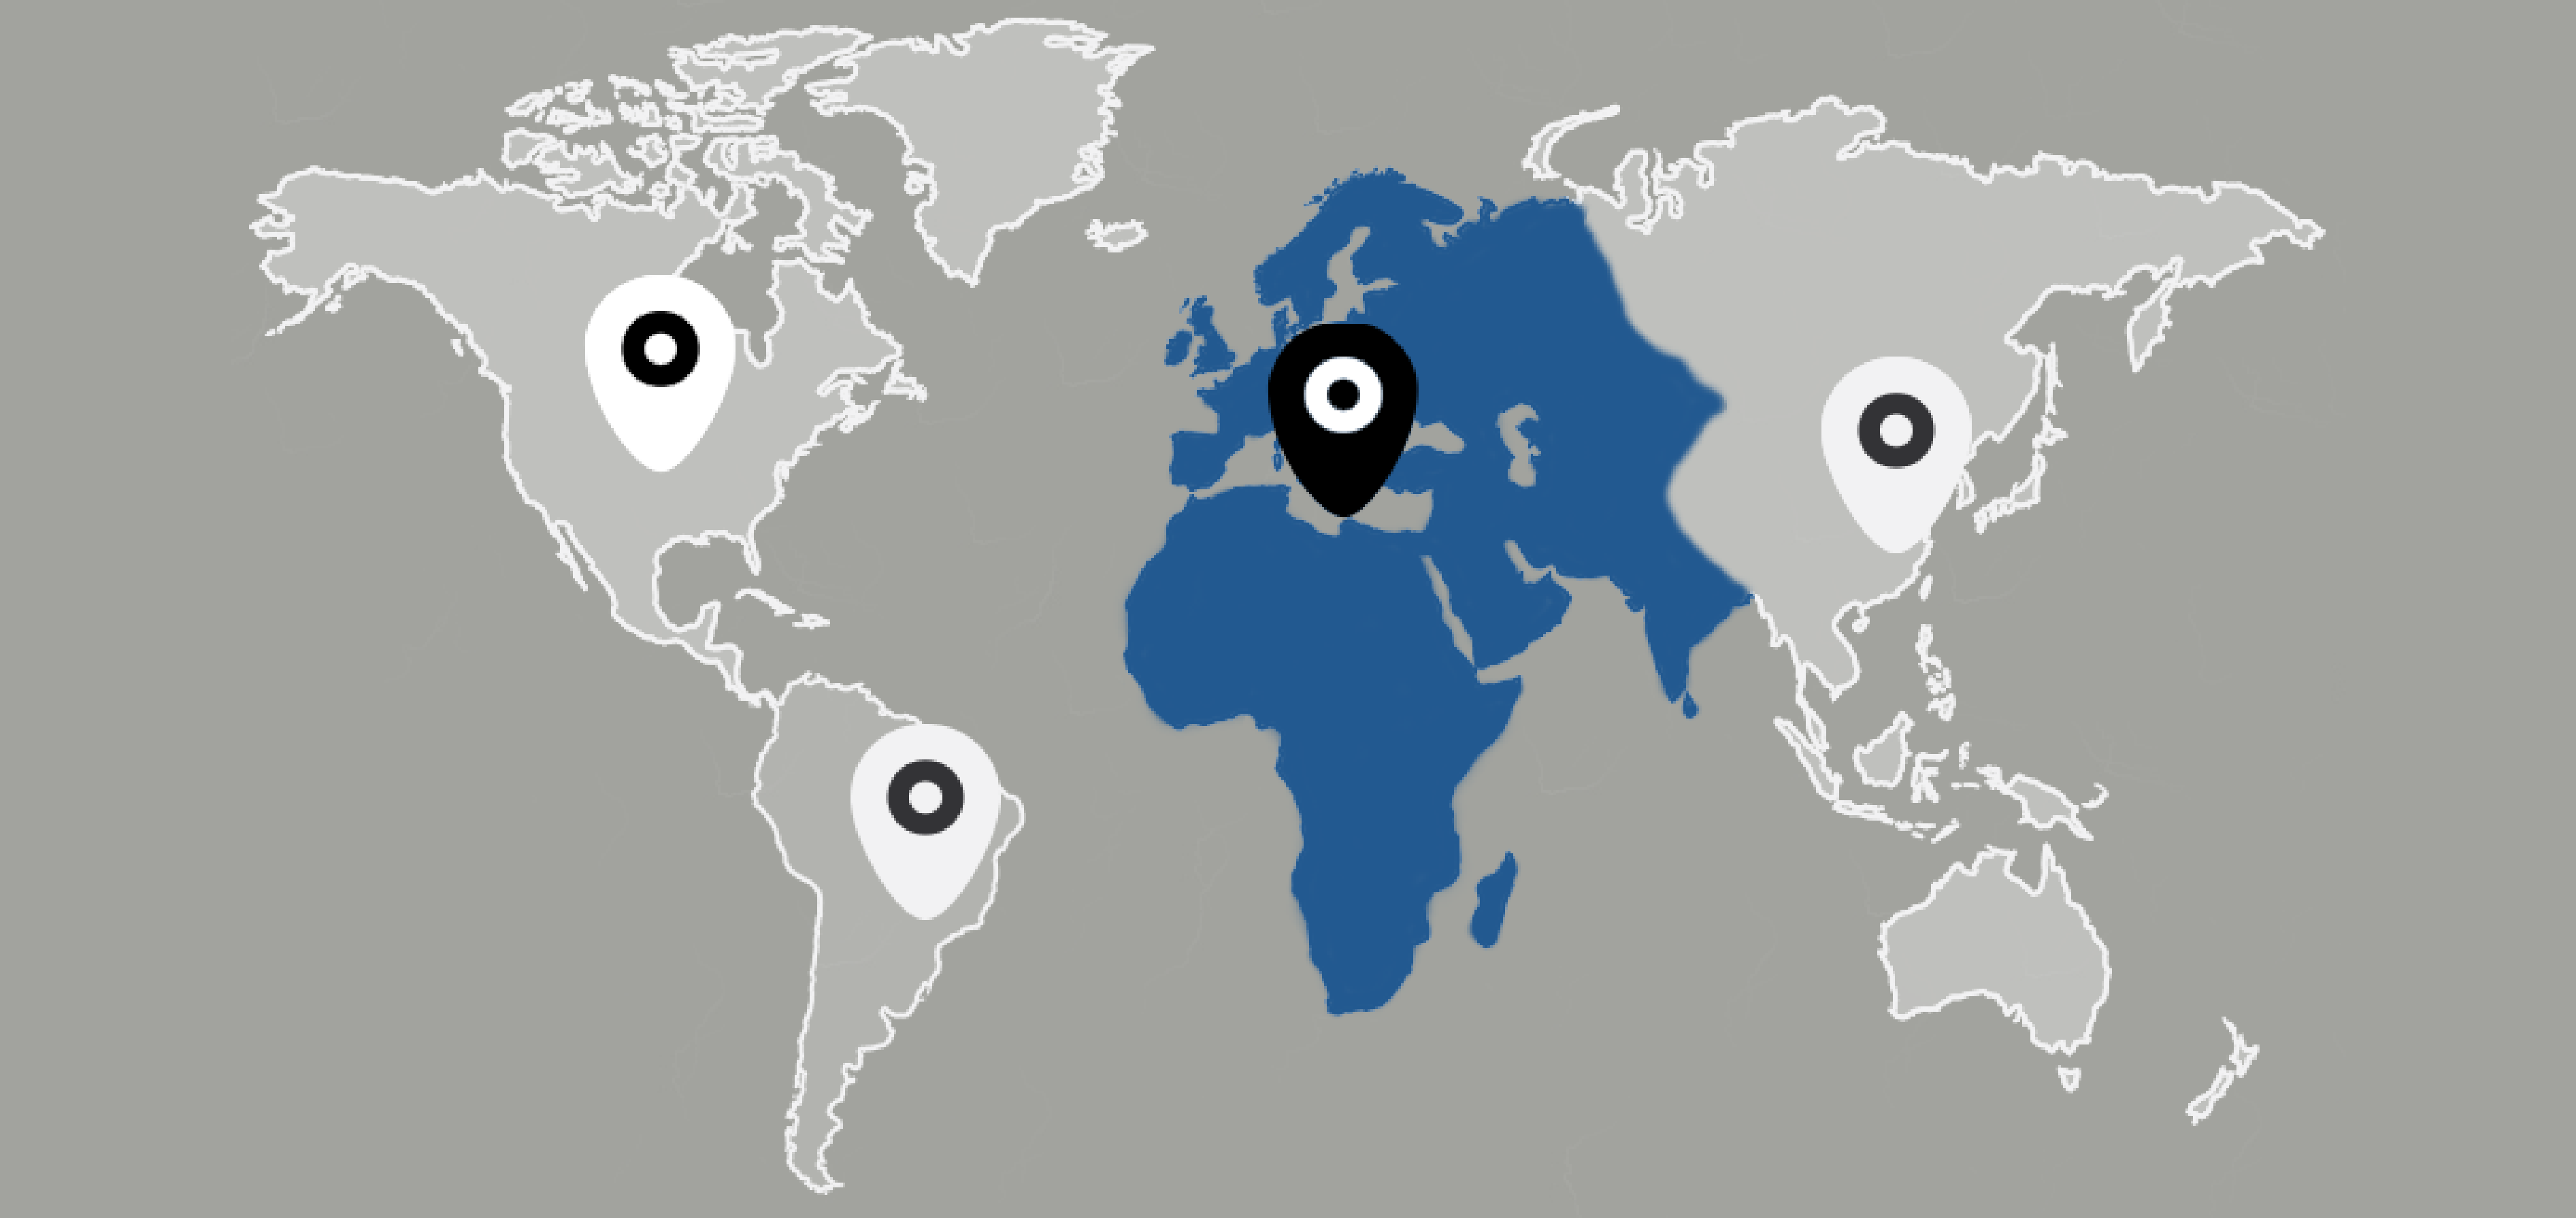 Olin Locations Europe | Middle East | Africa | India image